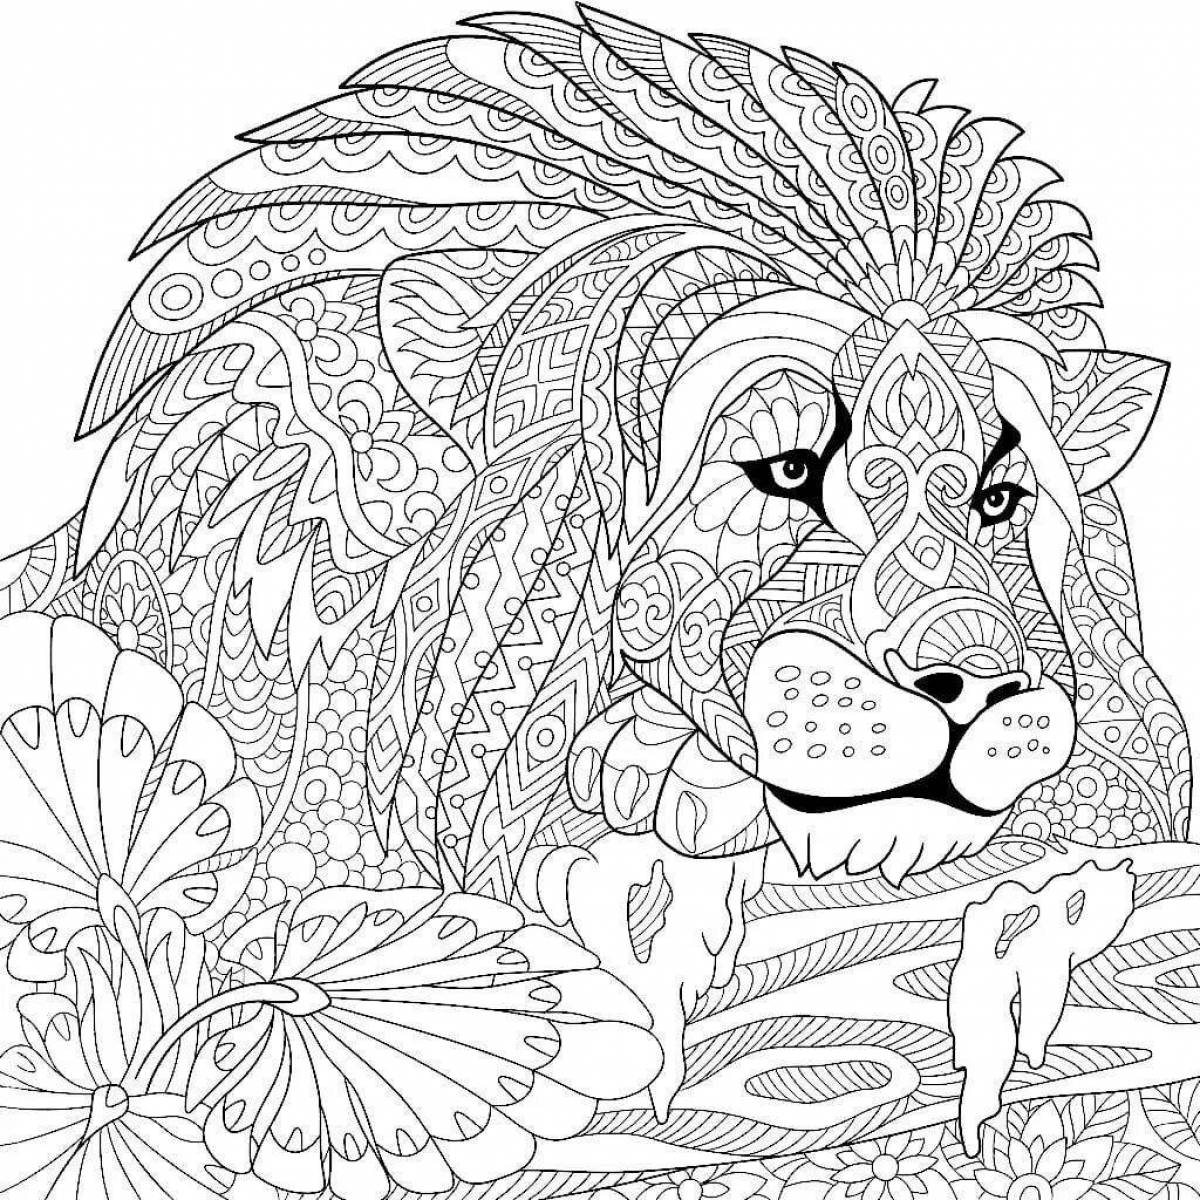 Funny anti-stress wildberry coloring book